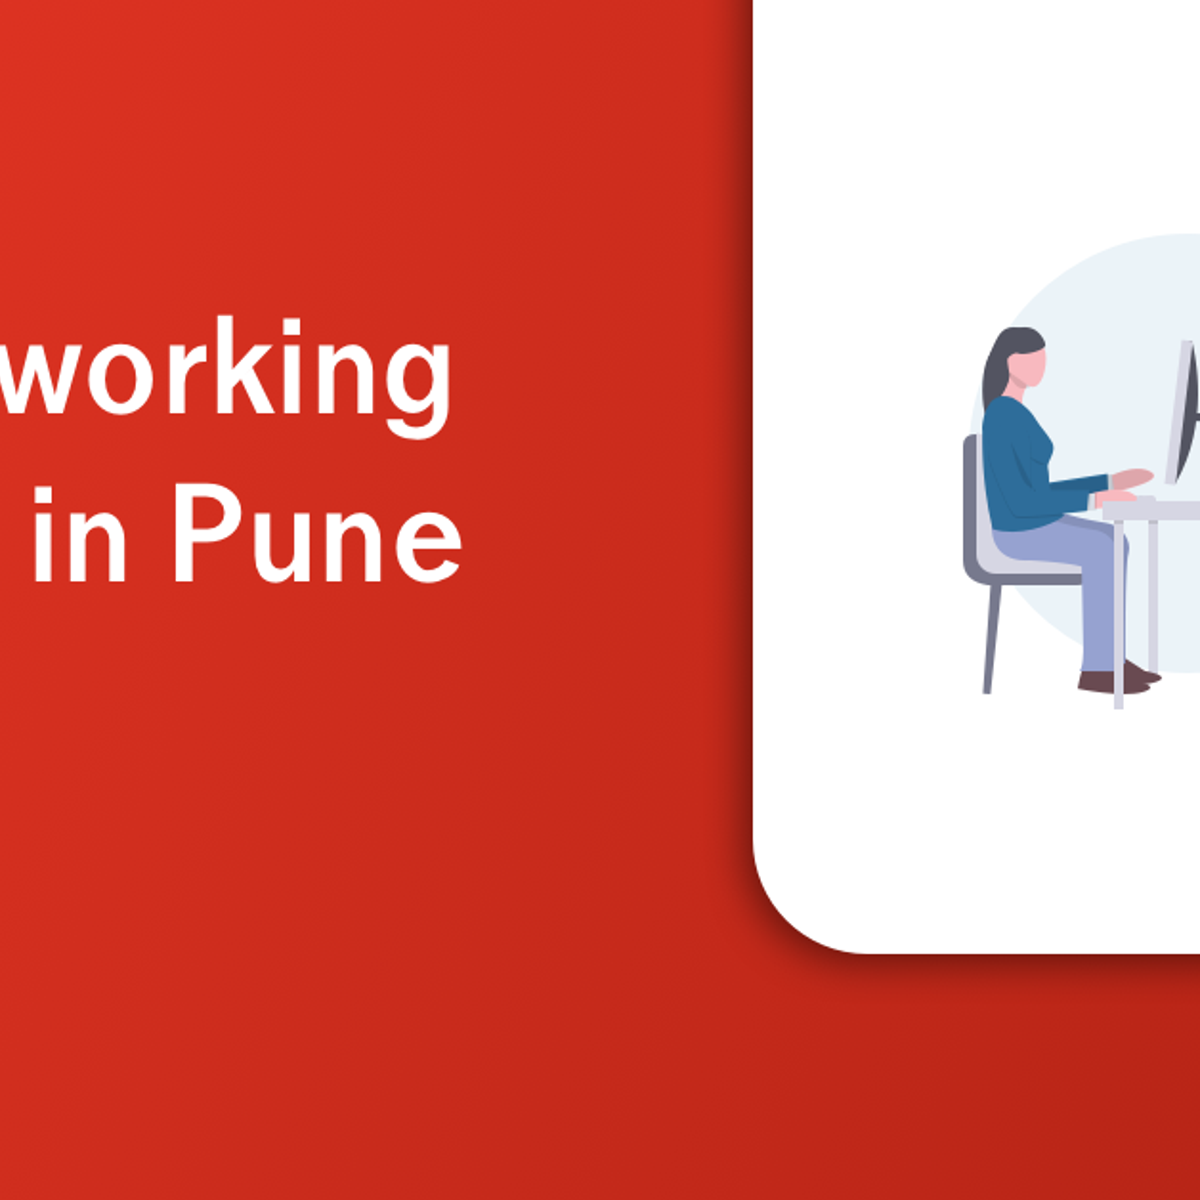 These 10 co-working spaces are gaining traction in Pune